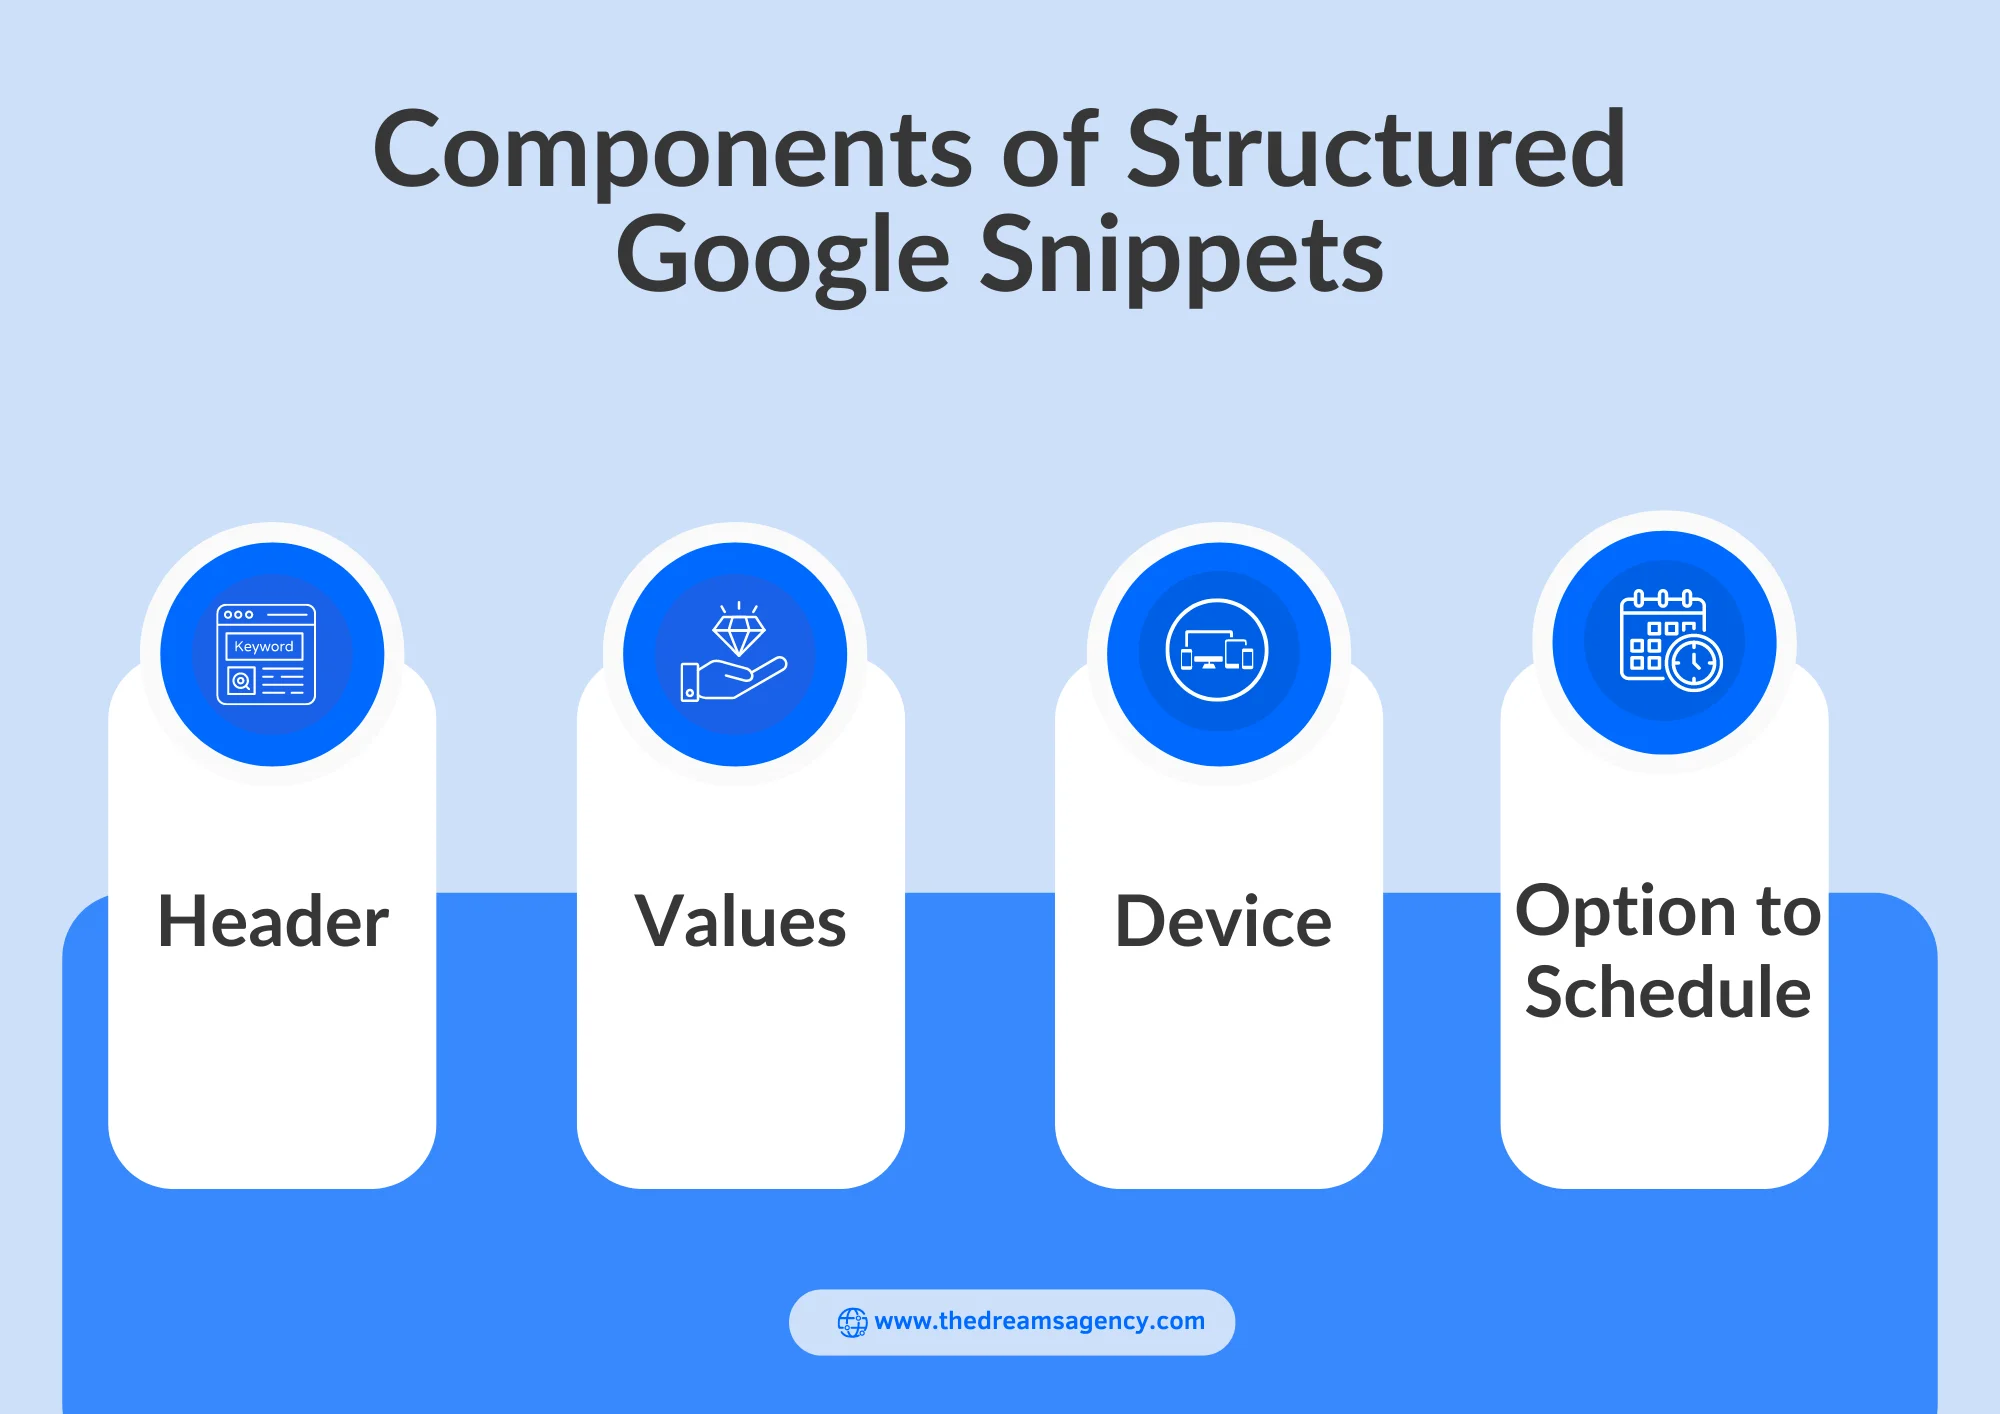 An infographic listing components of Google snippets